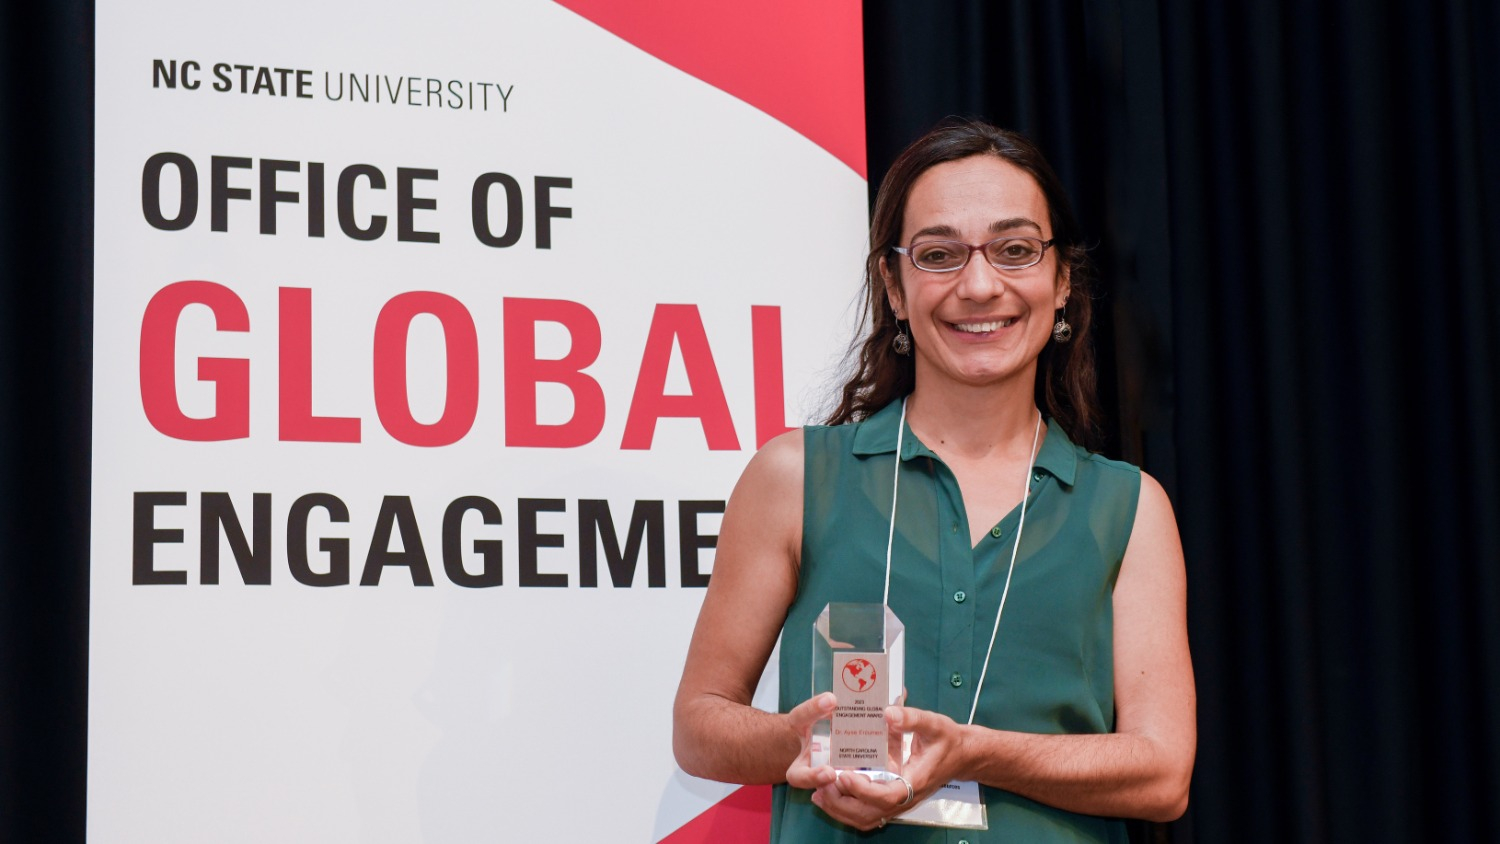 2019 Oustanding Global Engagement Award recipient posing for a picture with their award.